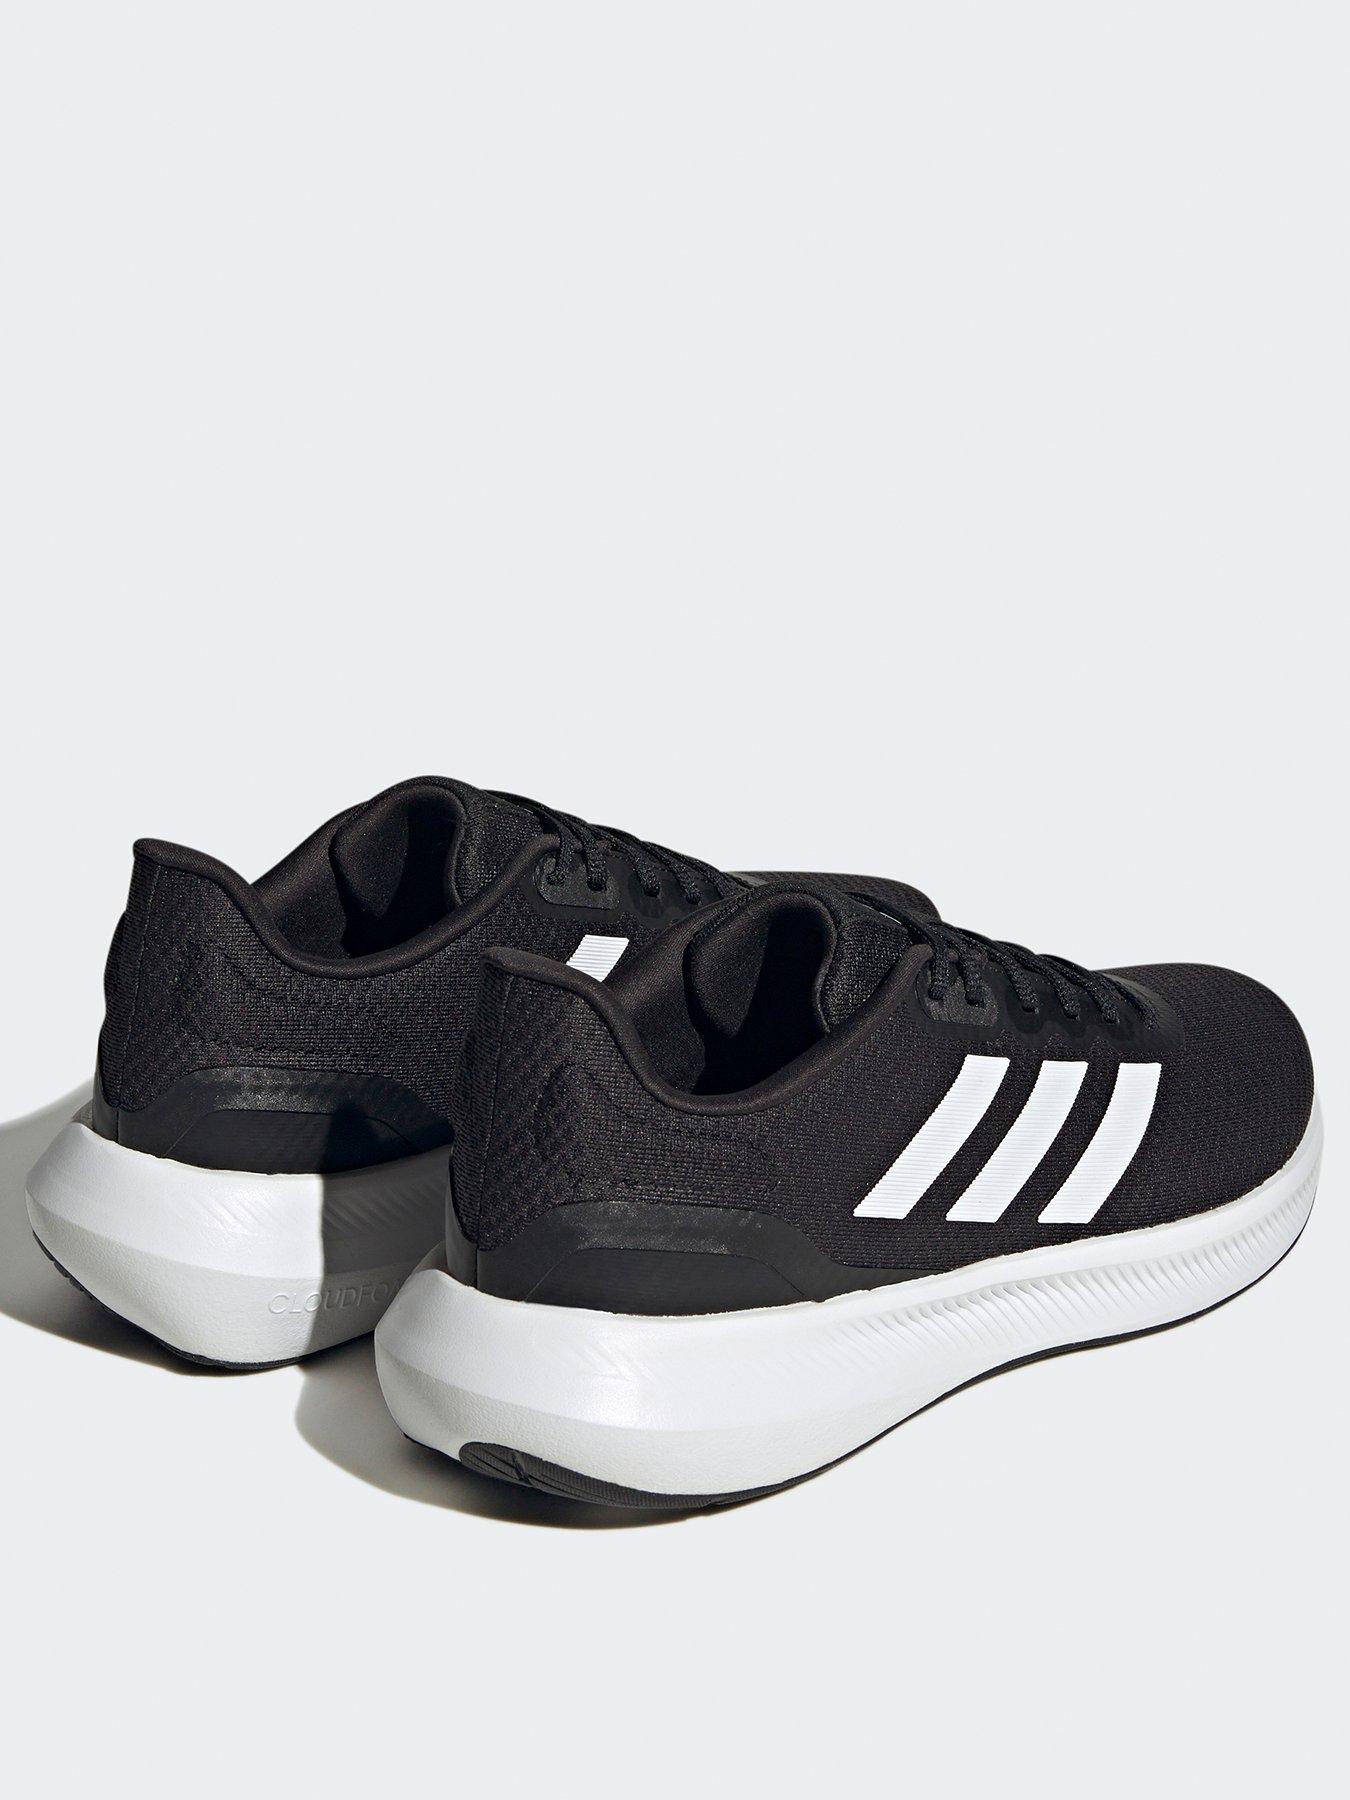 adidas Performance Runfalcon 3 Trainers - Black/White | littlewoods.com